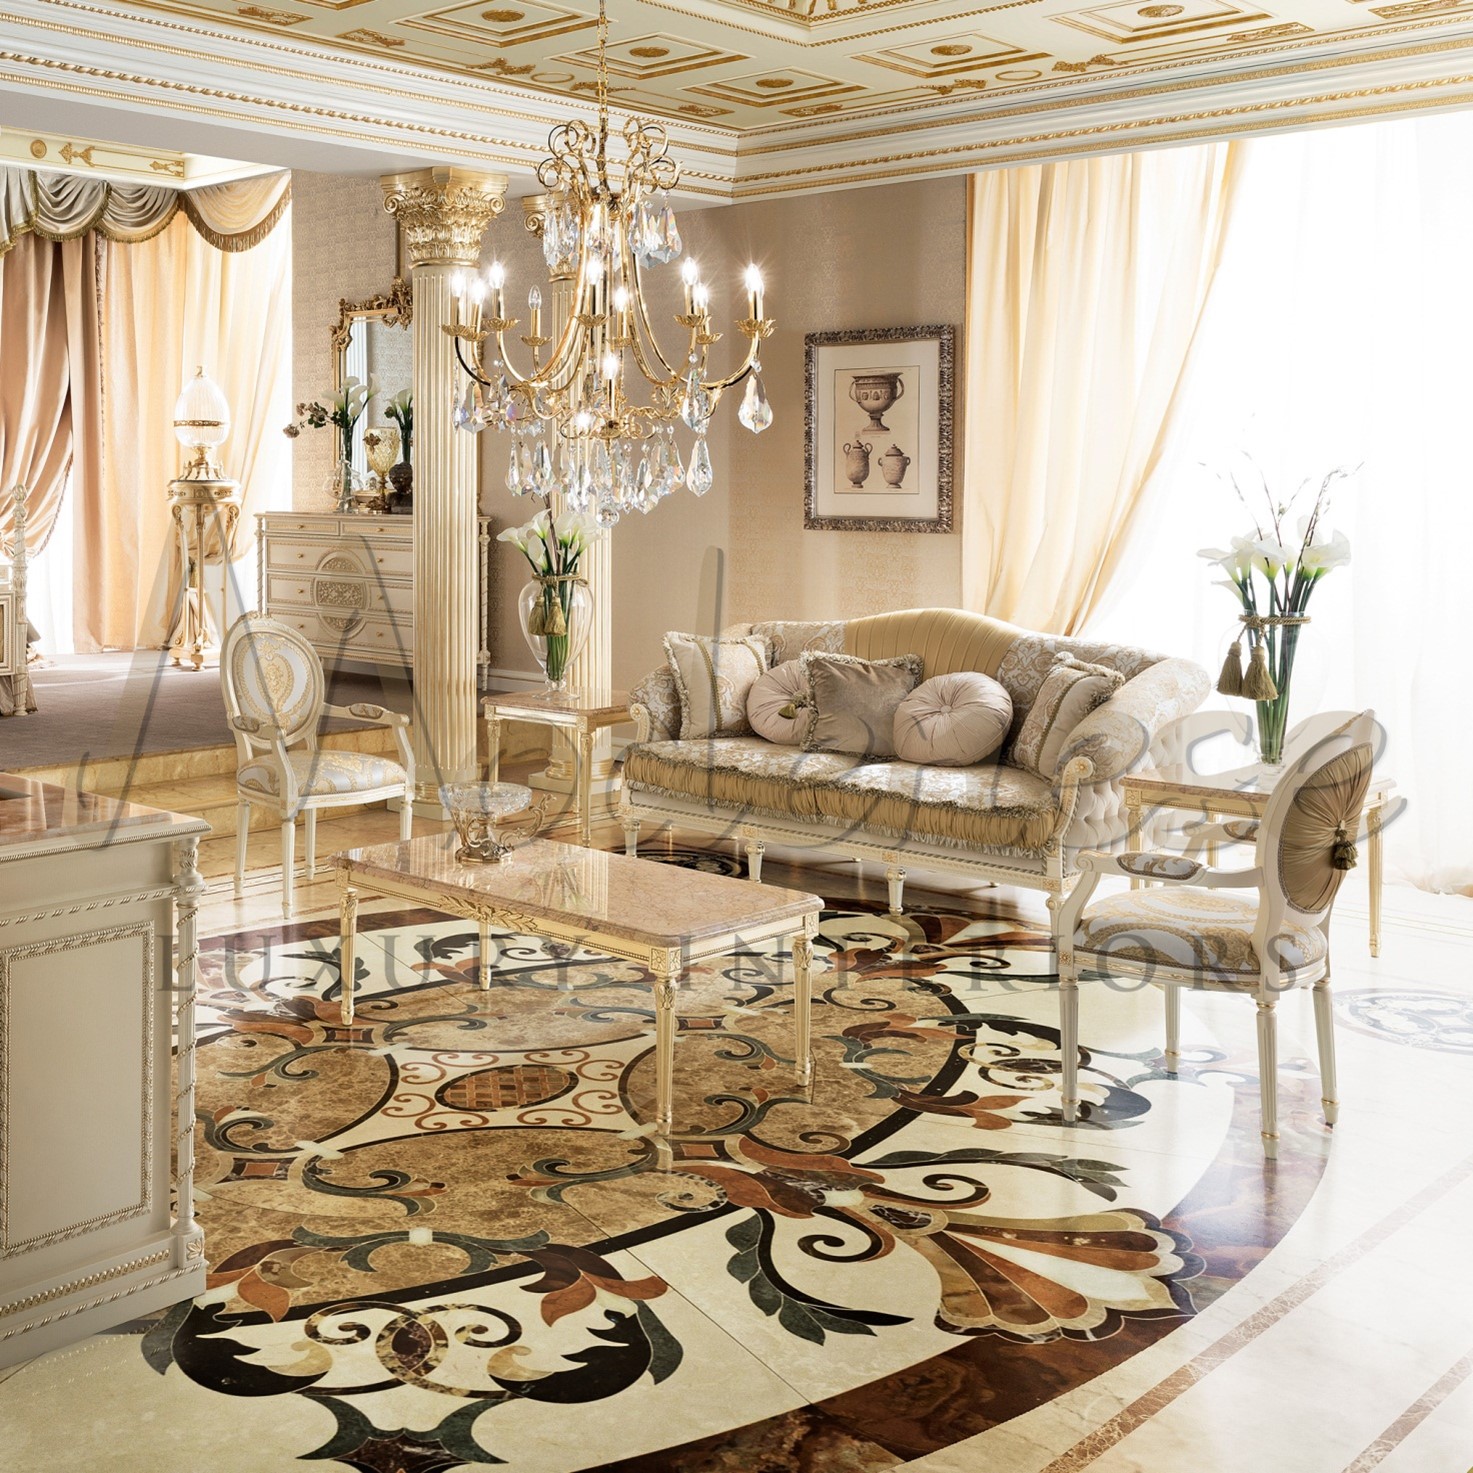 Leading interior design and fit-out firms in Riyadh, Saudi Arabia: Modenese Luxury Interiors